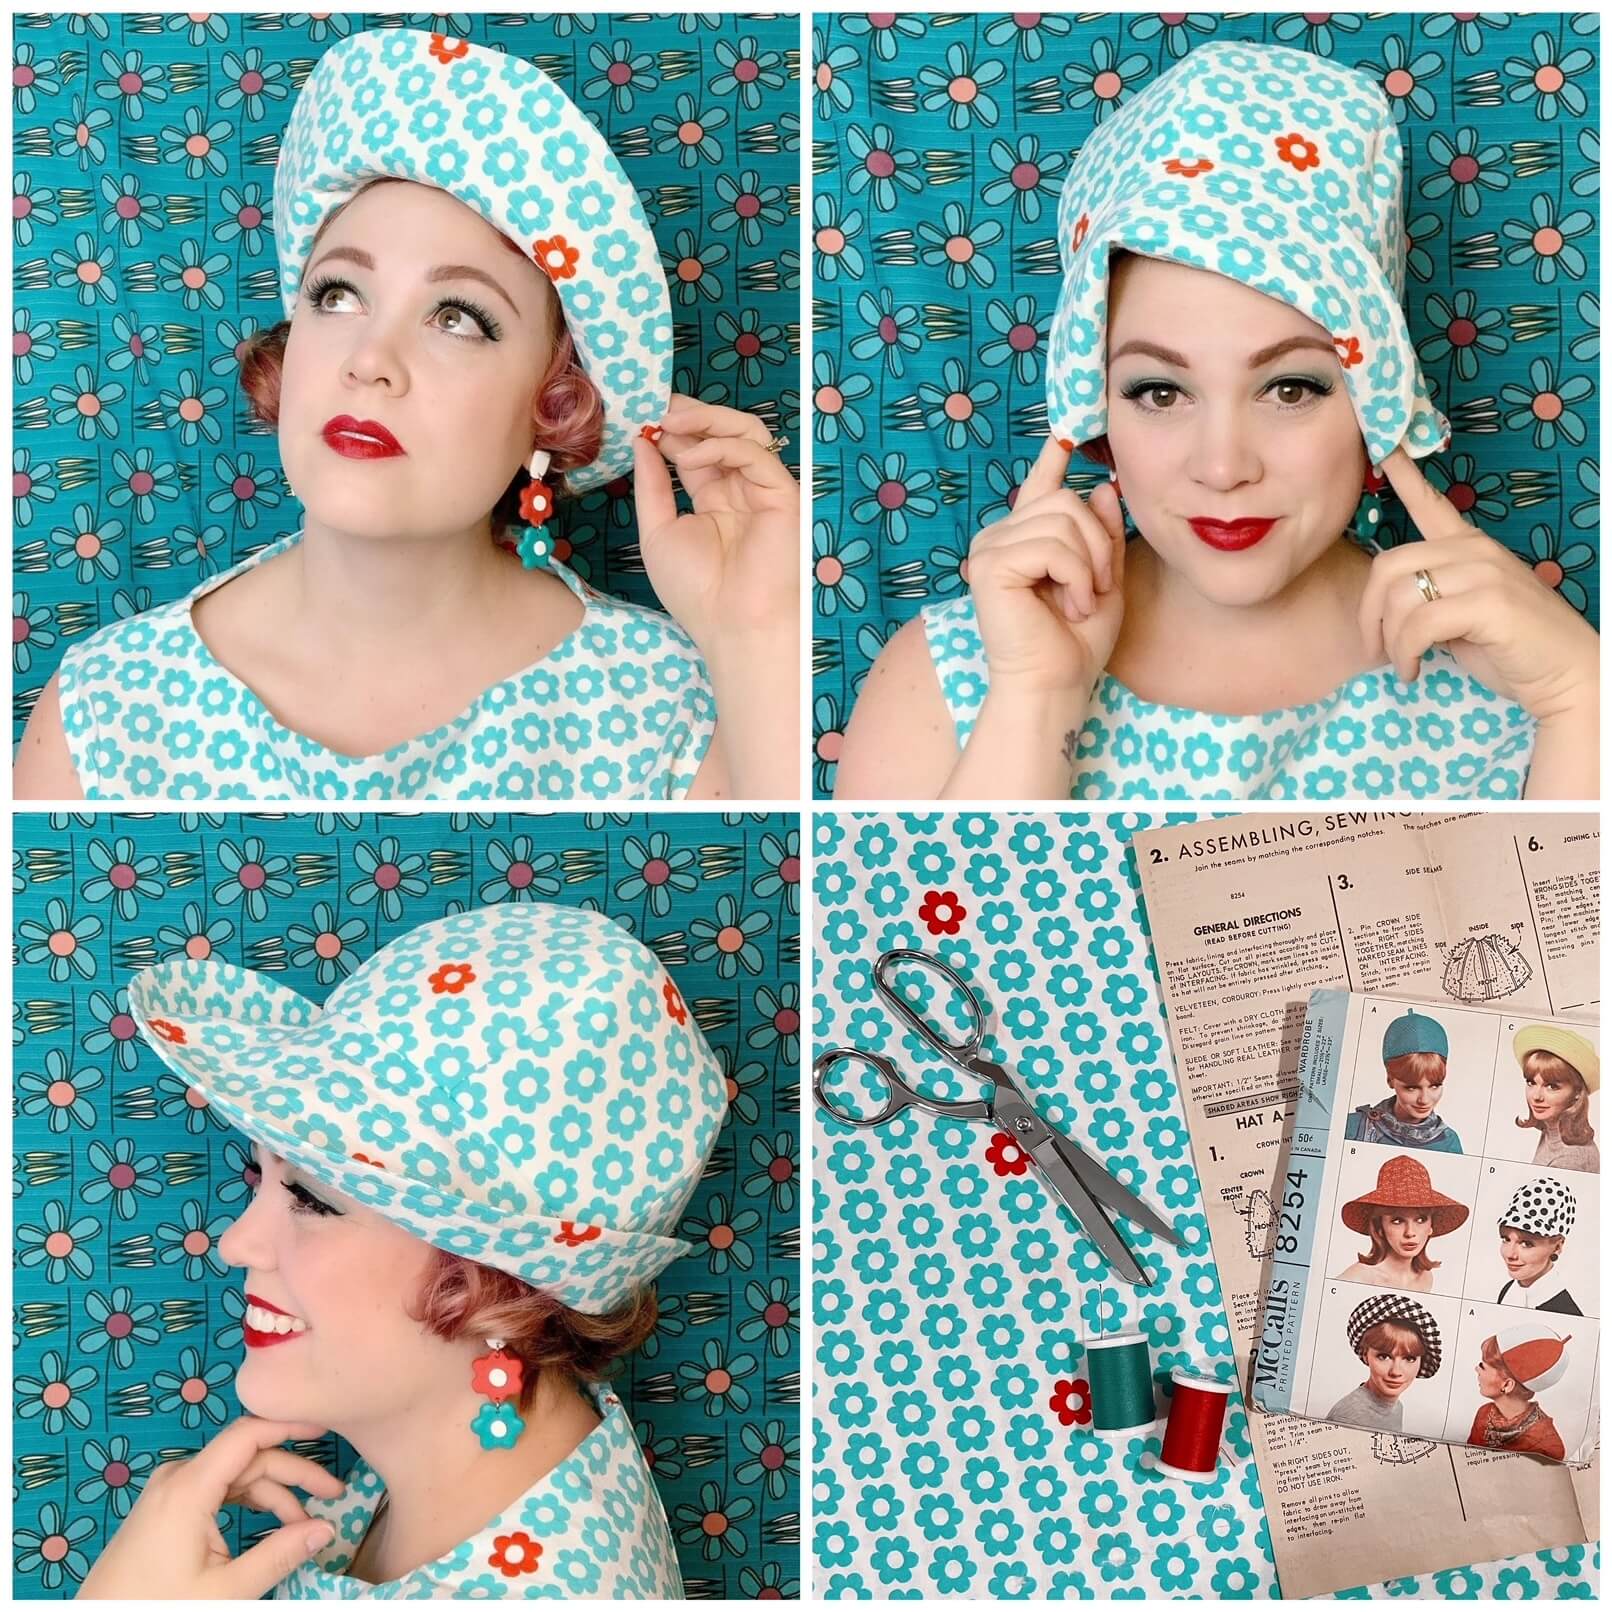 Buy 1950s Chiffon Scarf Retro Hair Tie 50s Sheer Square Neck Head Scarf  Vintage Neckerchief for Women Girls (Color 1) at Amazon.in